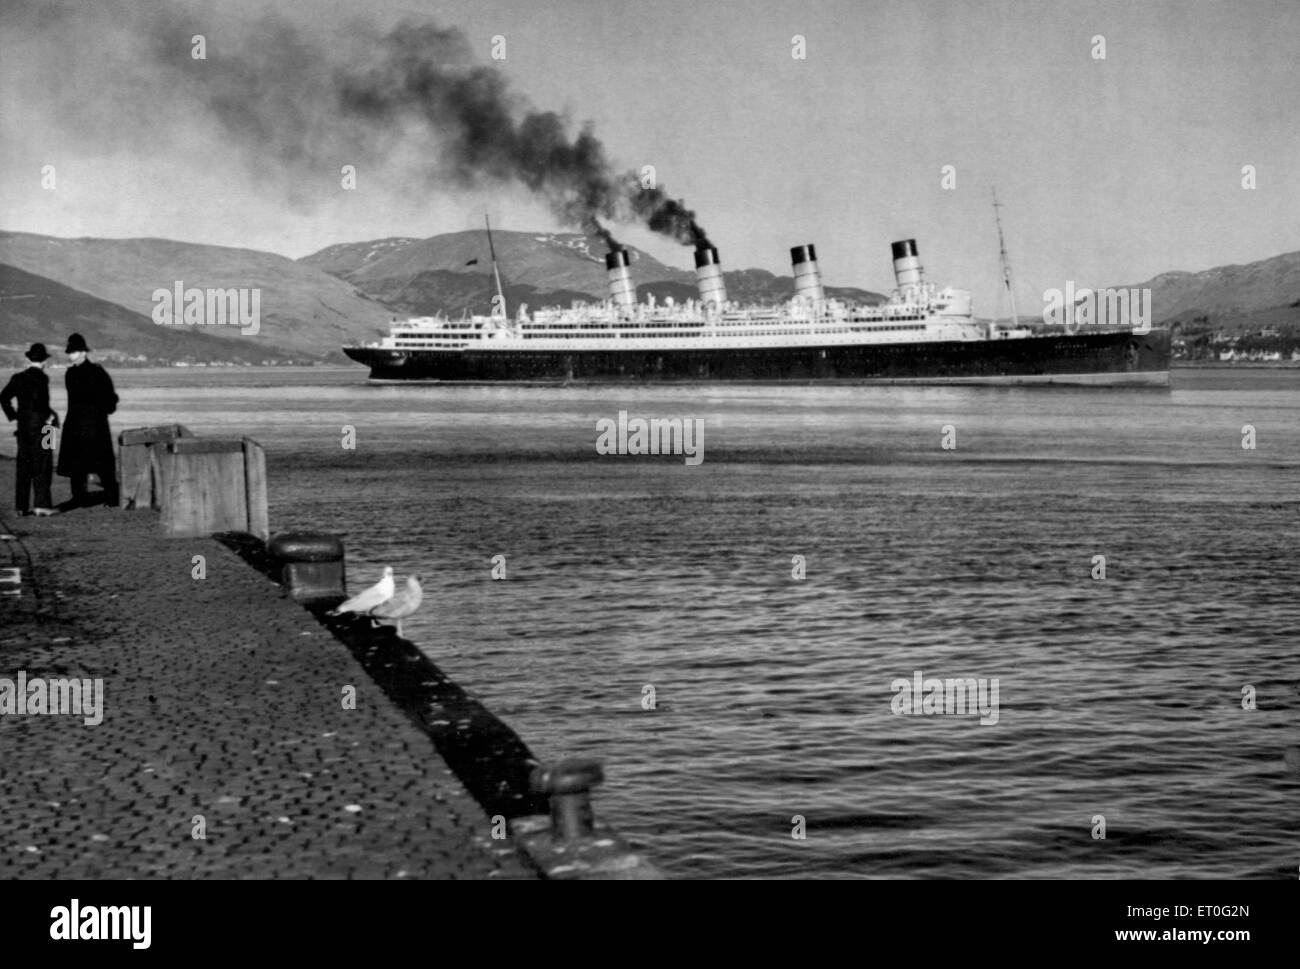 The 45,000 ton liner Aquitania arrives  at Gourock Pier on the The Clyde, where she sailed to from Southampton on her final voyage, to be broken up after 36 years service. 22nd February 1950. Stock Photo